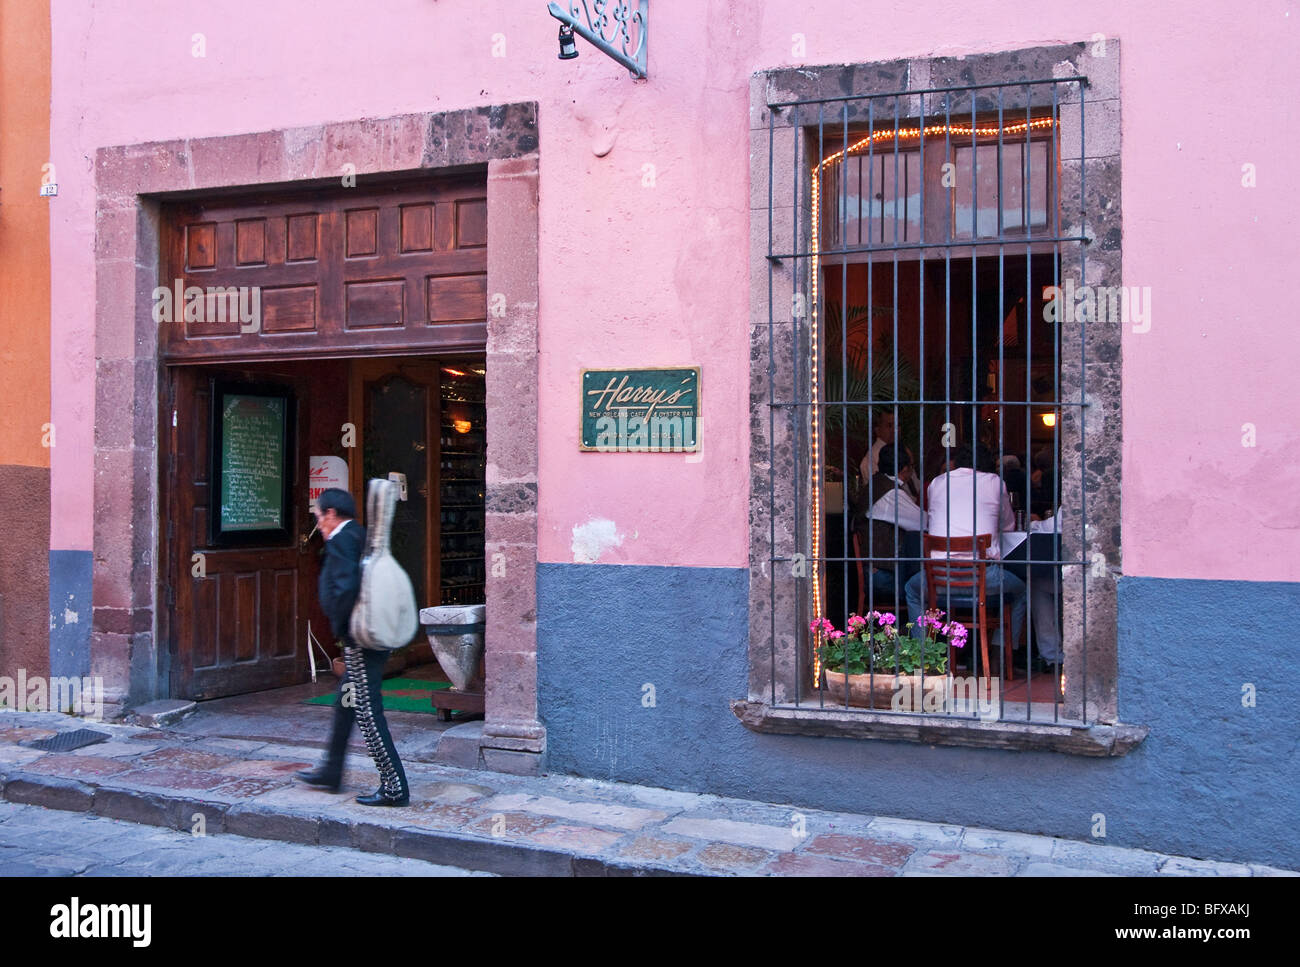 San Miguel de Allende expatriot favorite Harry's New Orleans Cafe and Oyster Bar Stock Photo